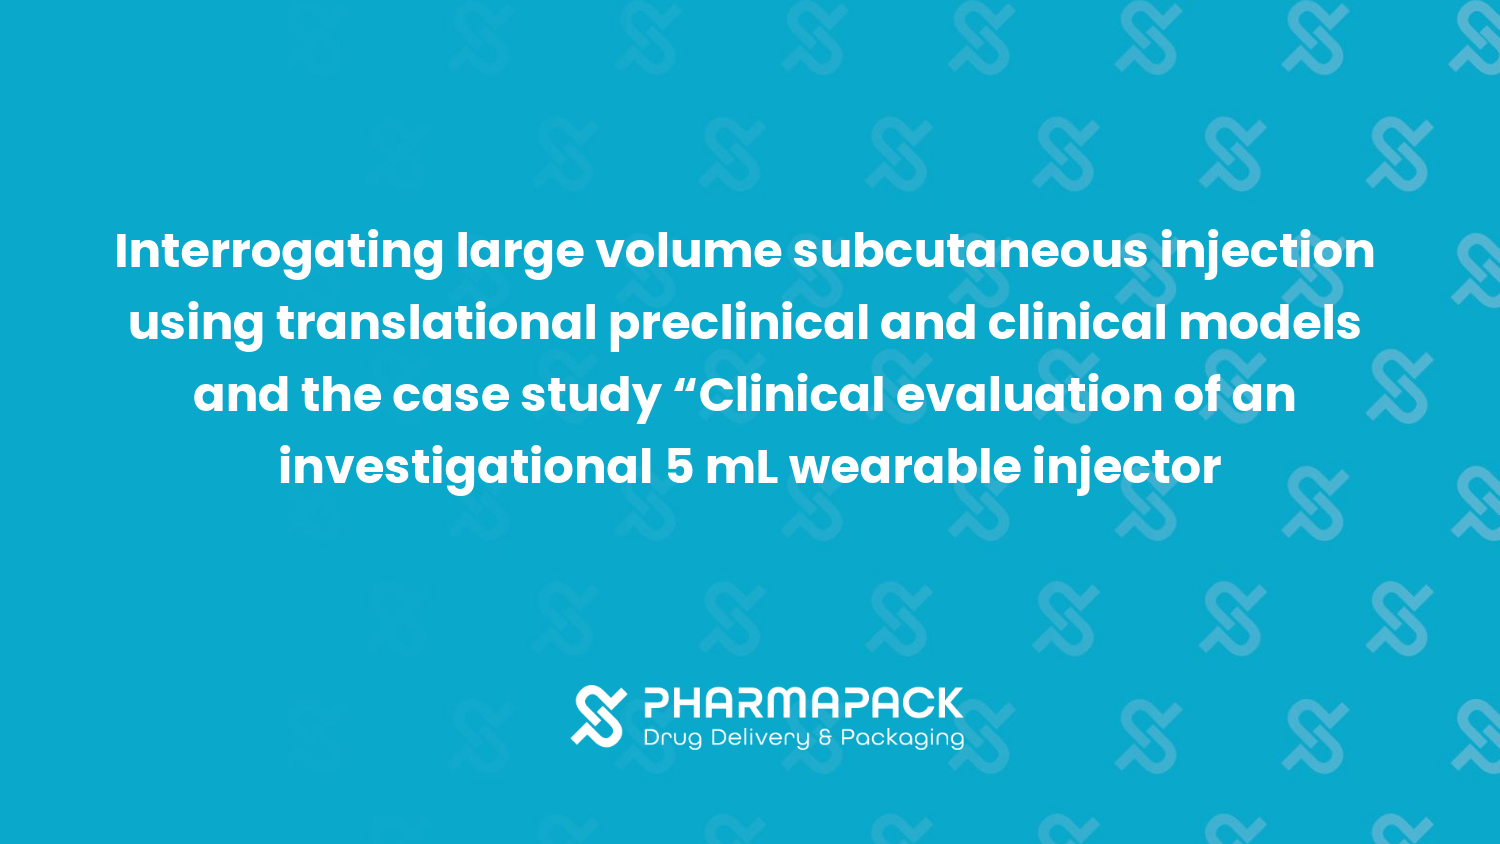 Interrogating Large Volume Subcutaneous Injection Using Translational Preclinical and Clinical Models and the Case Study “Clinical Evaluation of an Investigational 5mL Wearable Injector